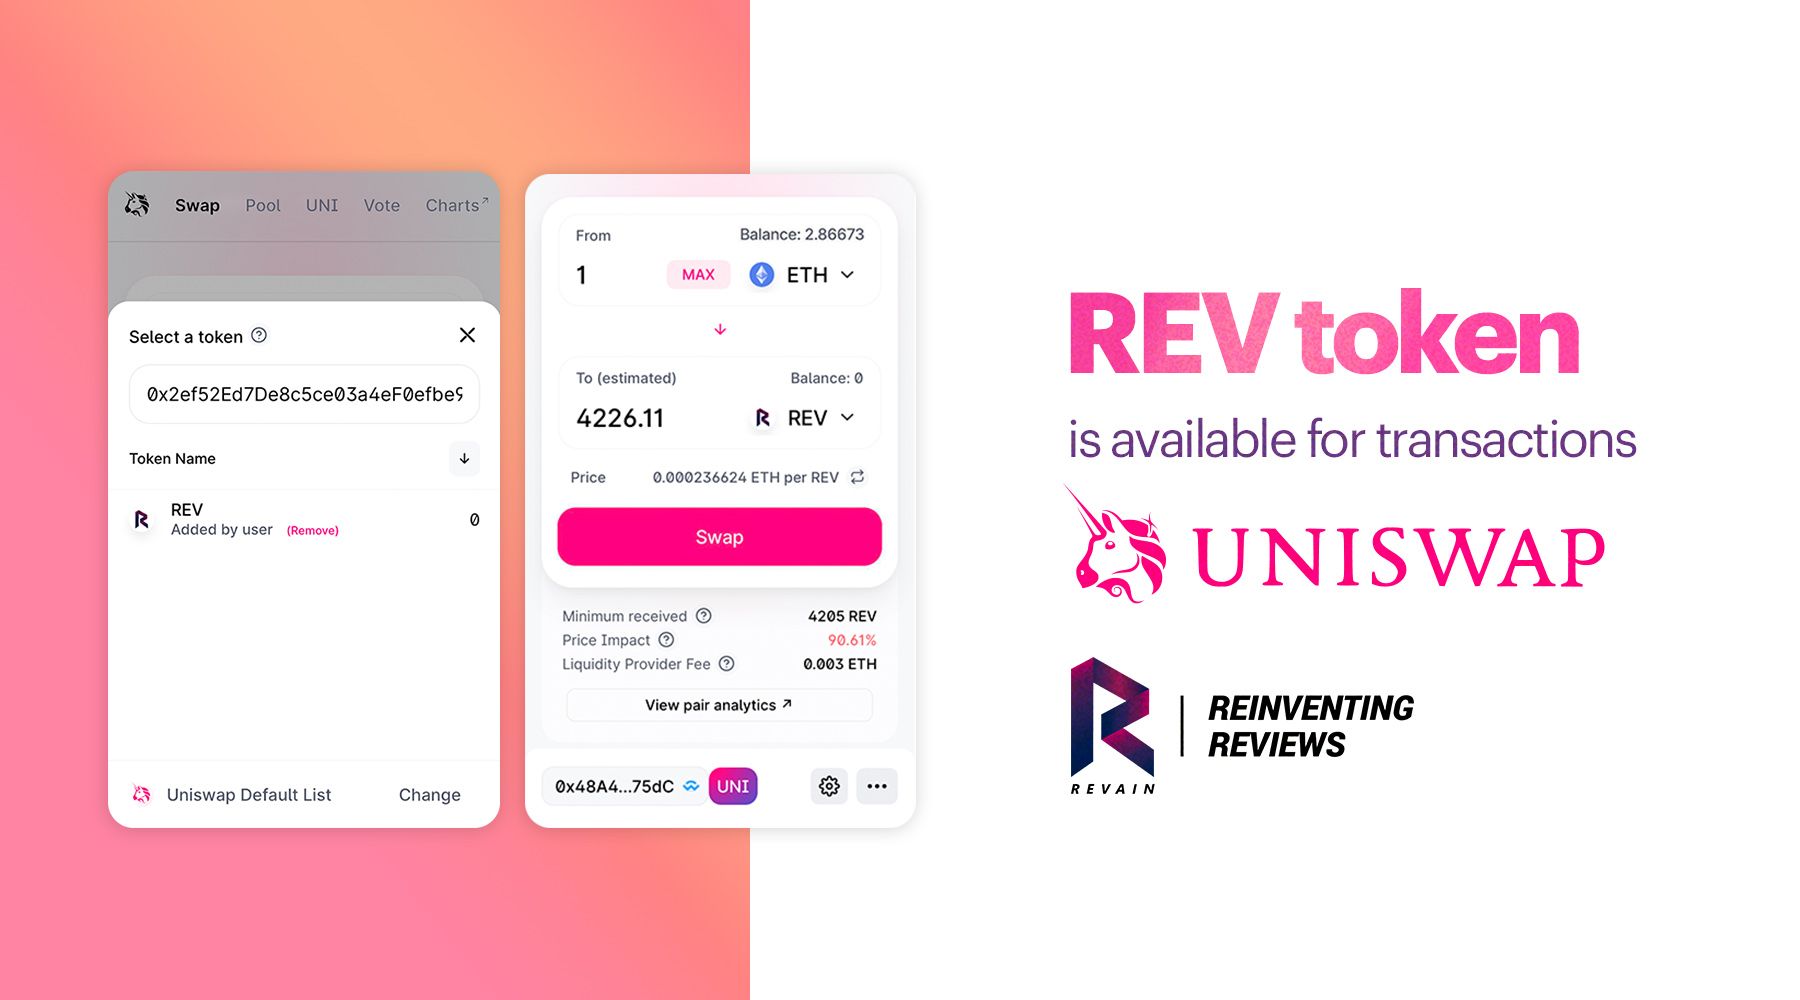 REV token is available for transactions on Uniswap